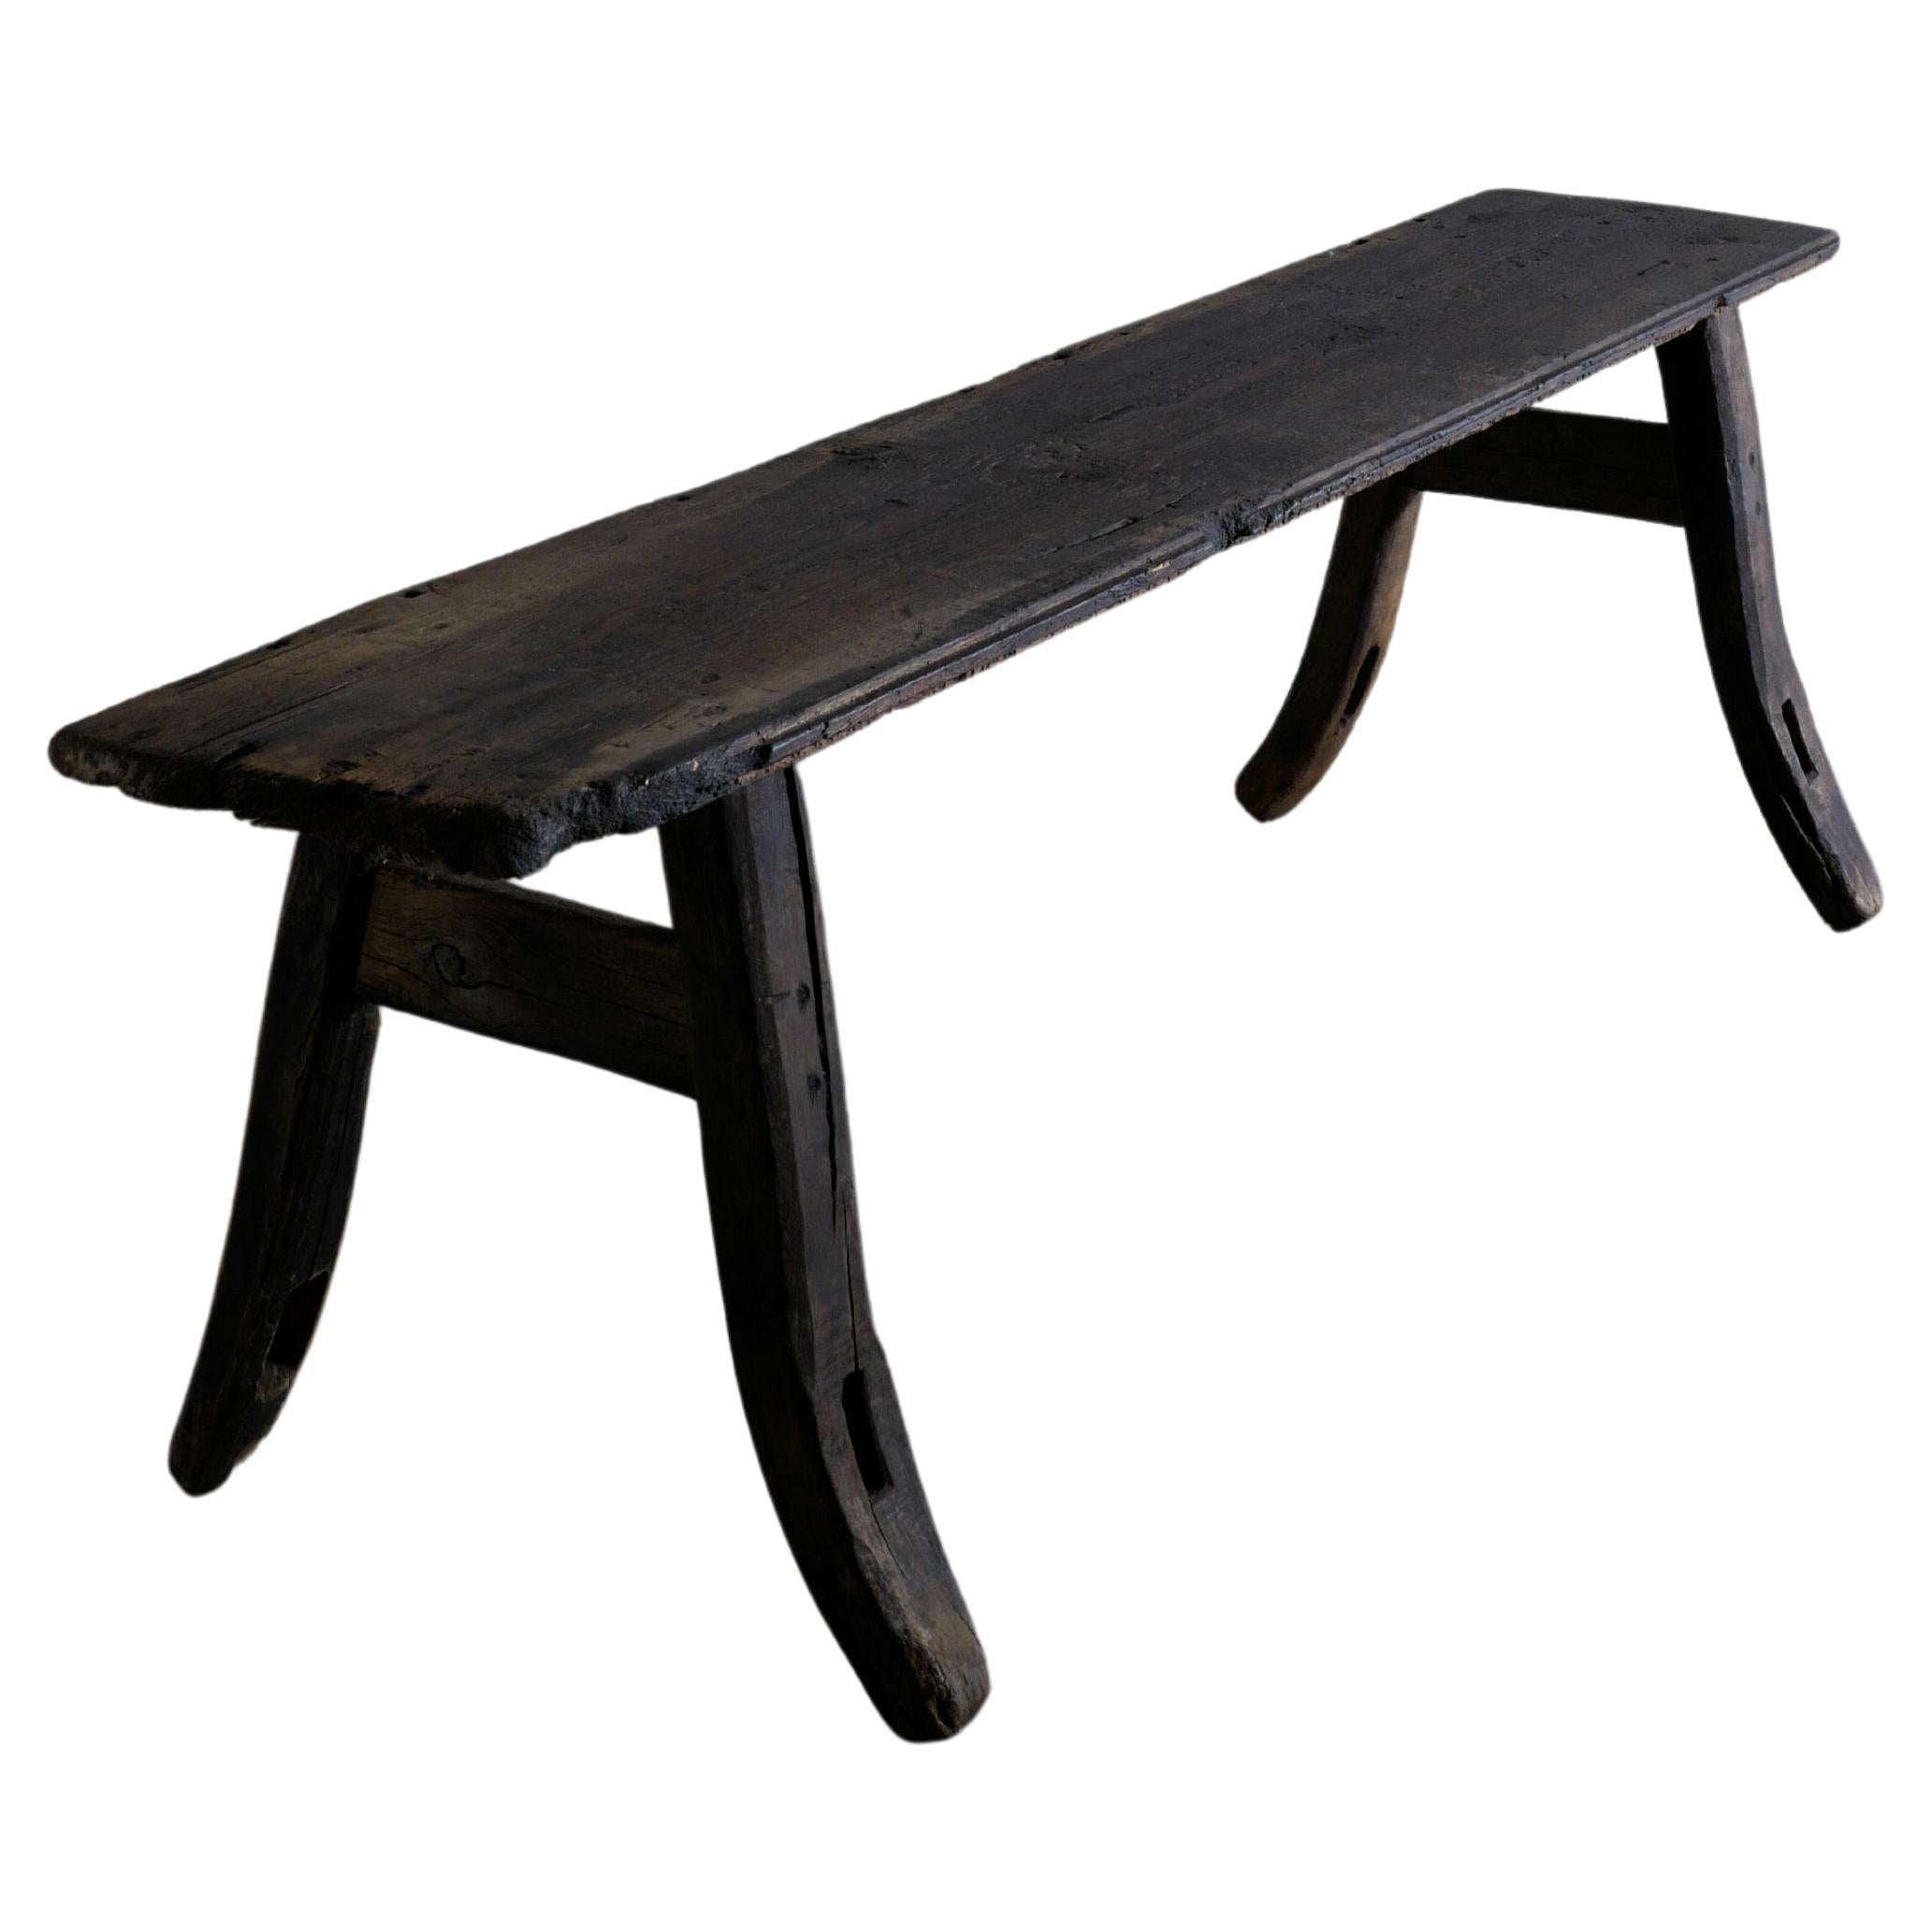 Swedish Wabi Sabi Wooden Bench in Pine From the Early 1900s